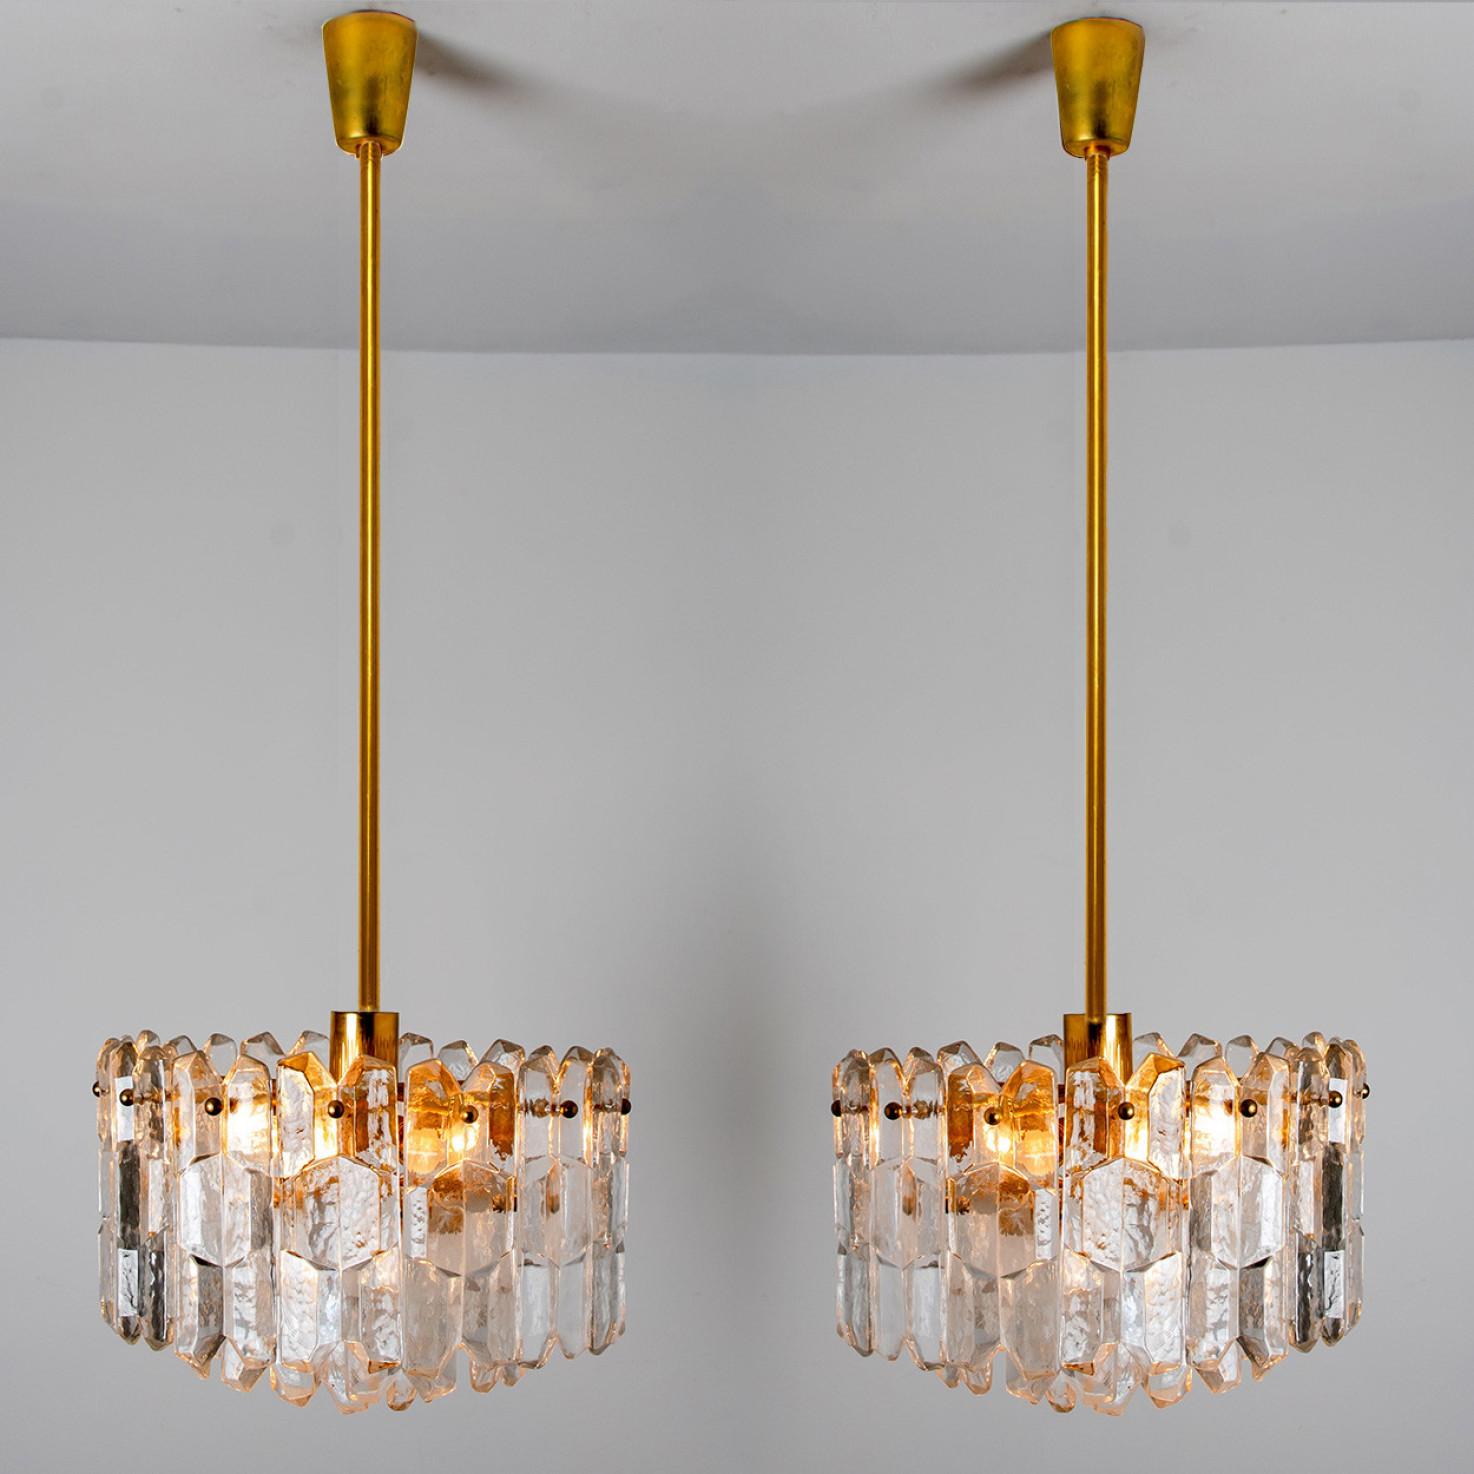 A pair of high quality and handmade gilt brass light fixtures made by Kalmar in Austria. This model Palazzo was manufactured, circa 1970-1979. Large polished brilliant crystal glasses are mounted on a gilded brass frame.

It needs seven small